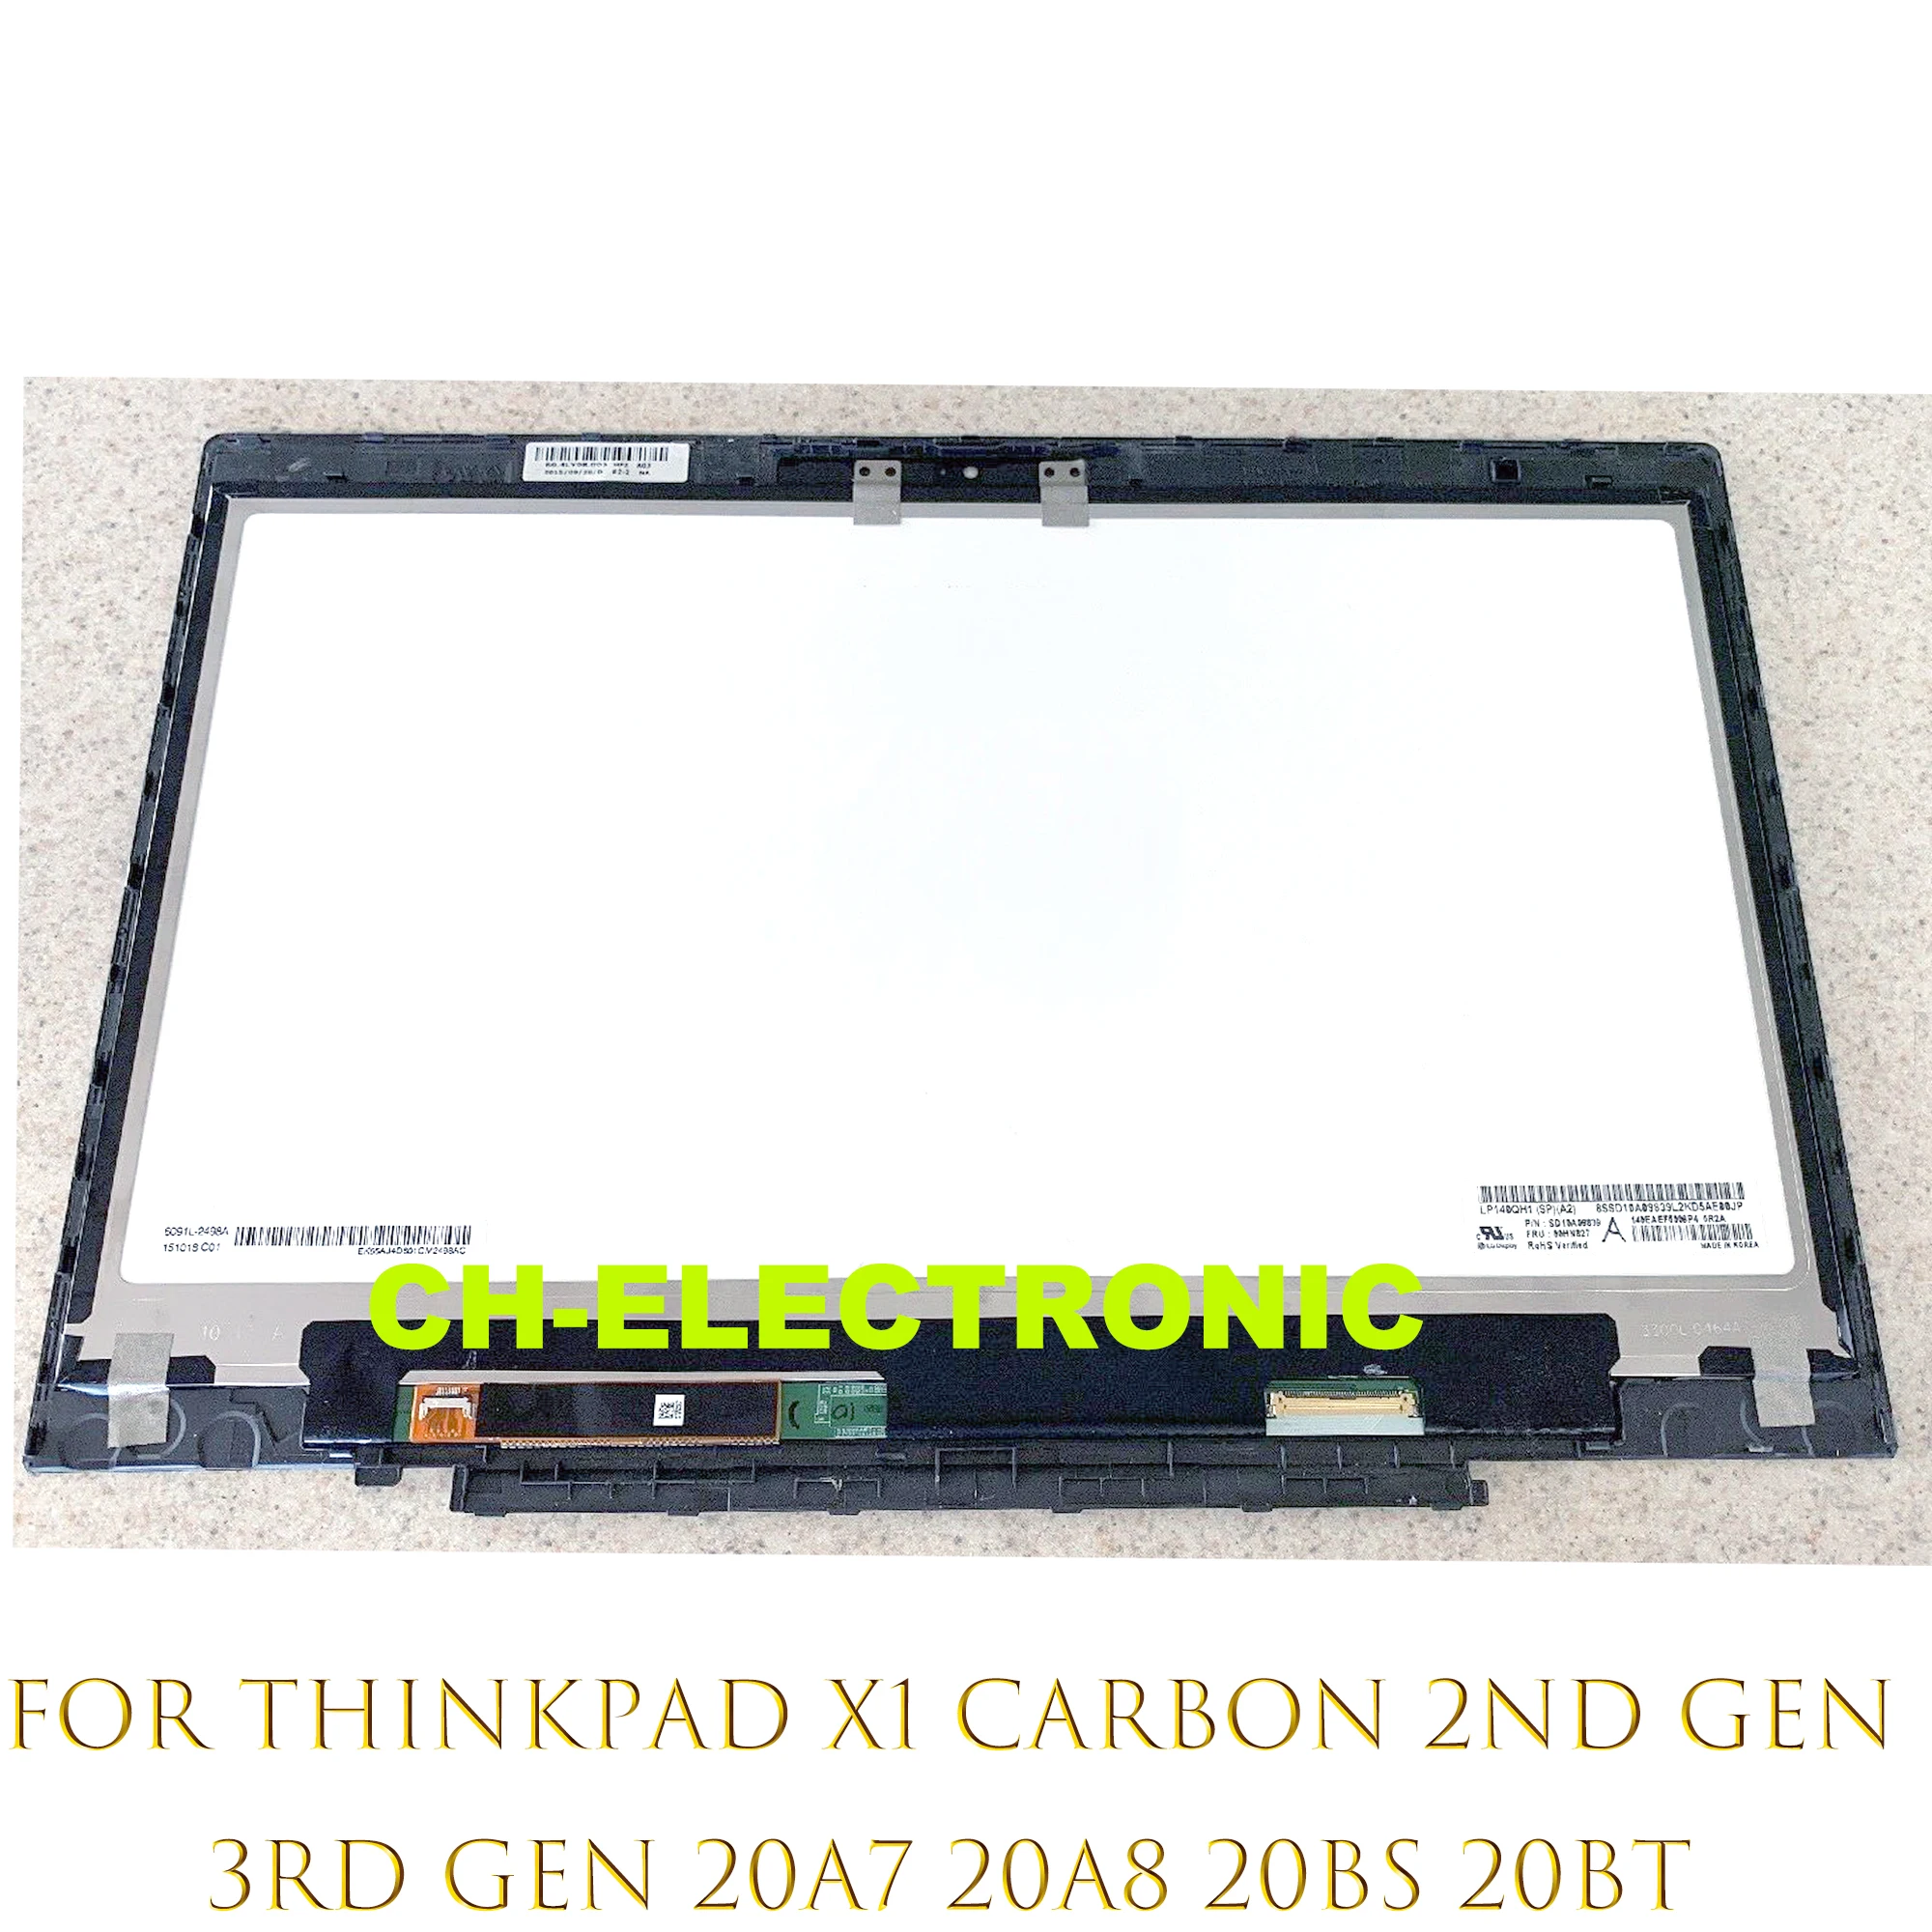 

14.0" LCD Touch Screen Replacement Assembly For Lenovo ThinkPad X1 Carbon 2nd Gen 3rd Gen 20A7 20A8 20BS 20BT WQHD